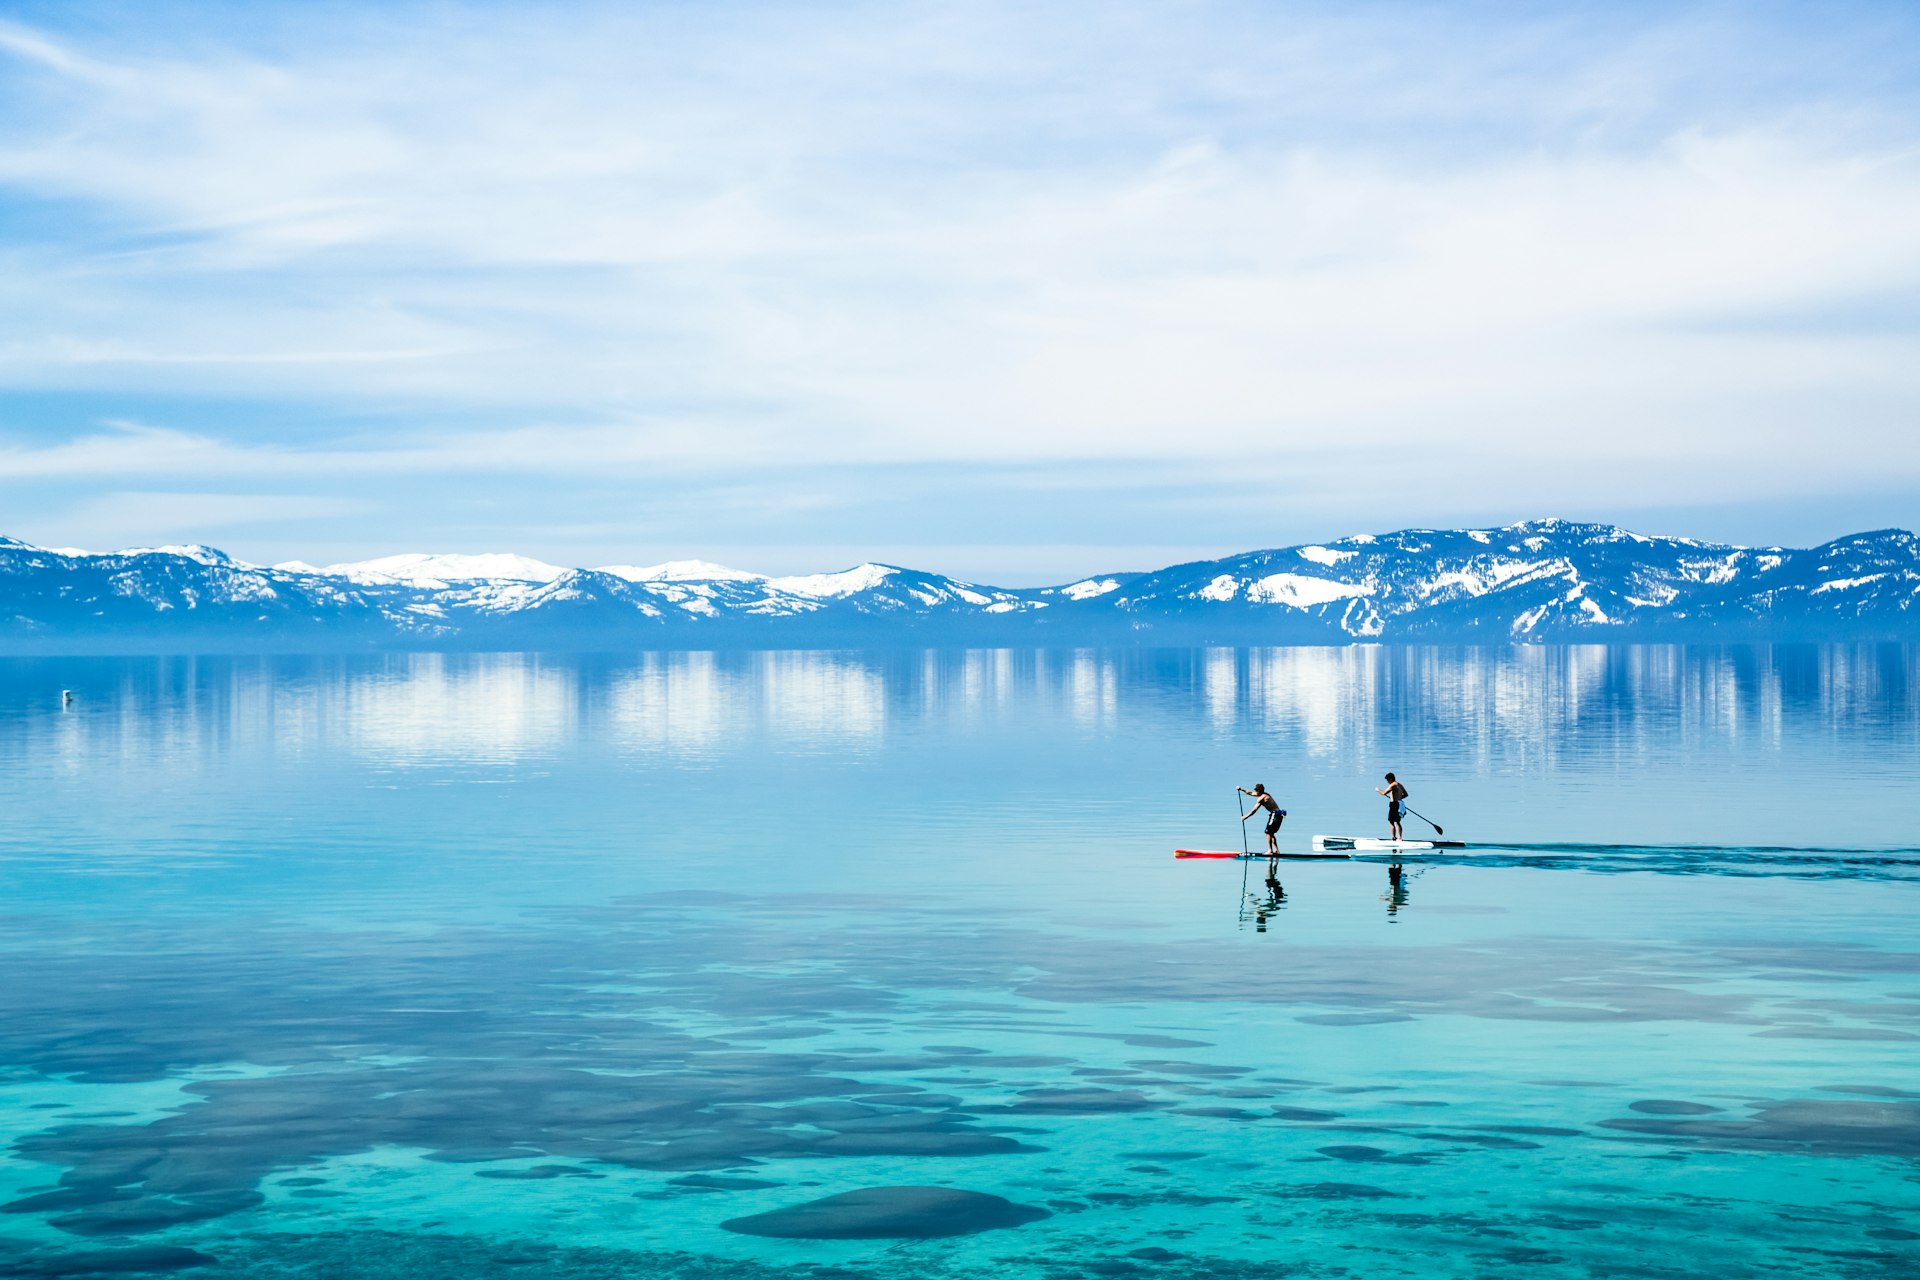 Paddleboarders float out on an alpine lake as the sun shines